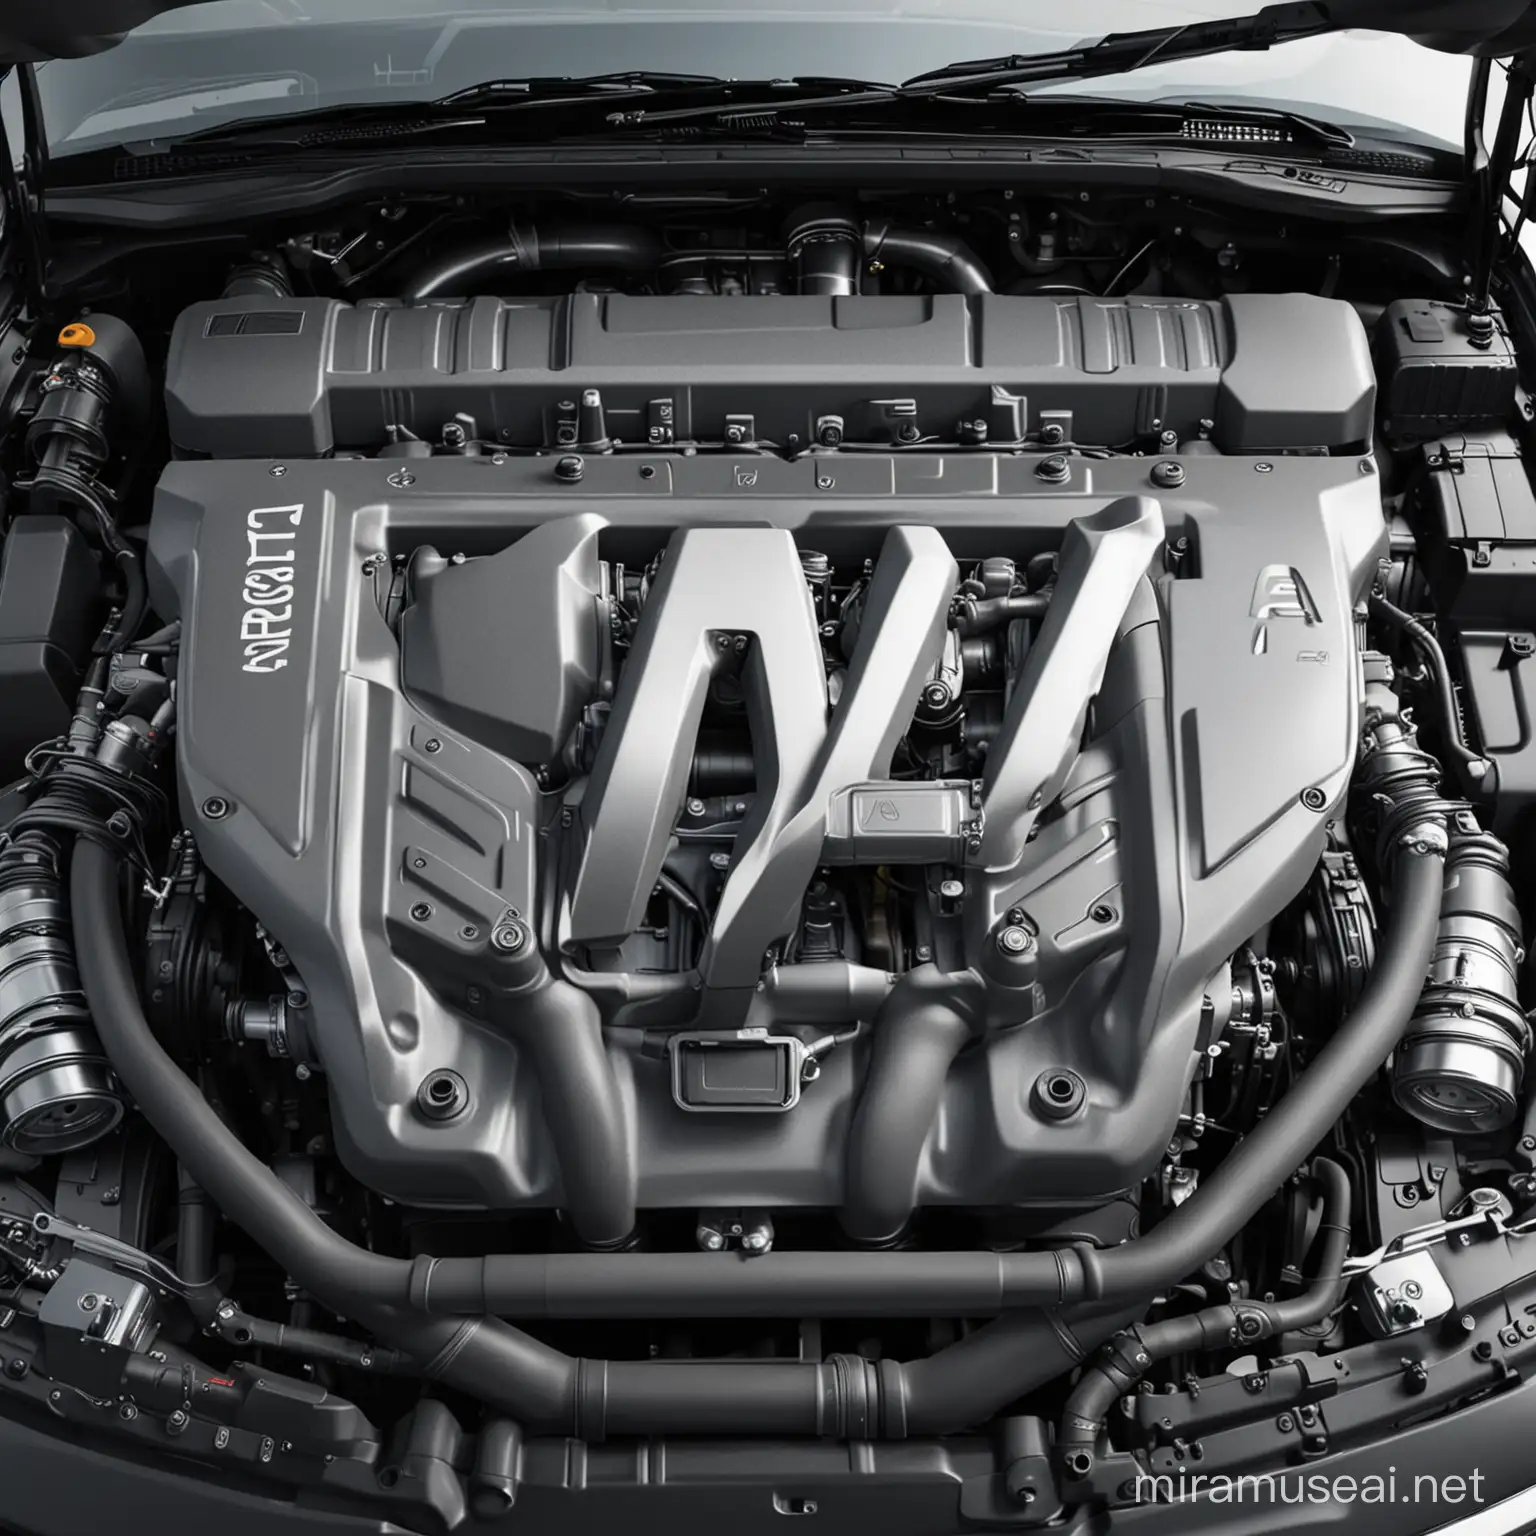 Realistic Car Engine Under the Hood with Folded AShaped Cover